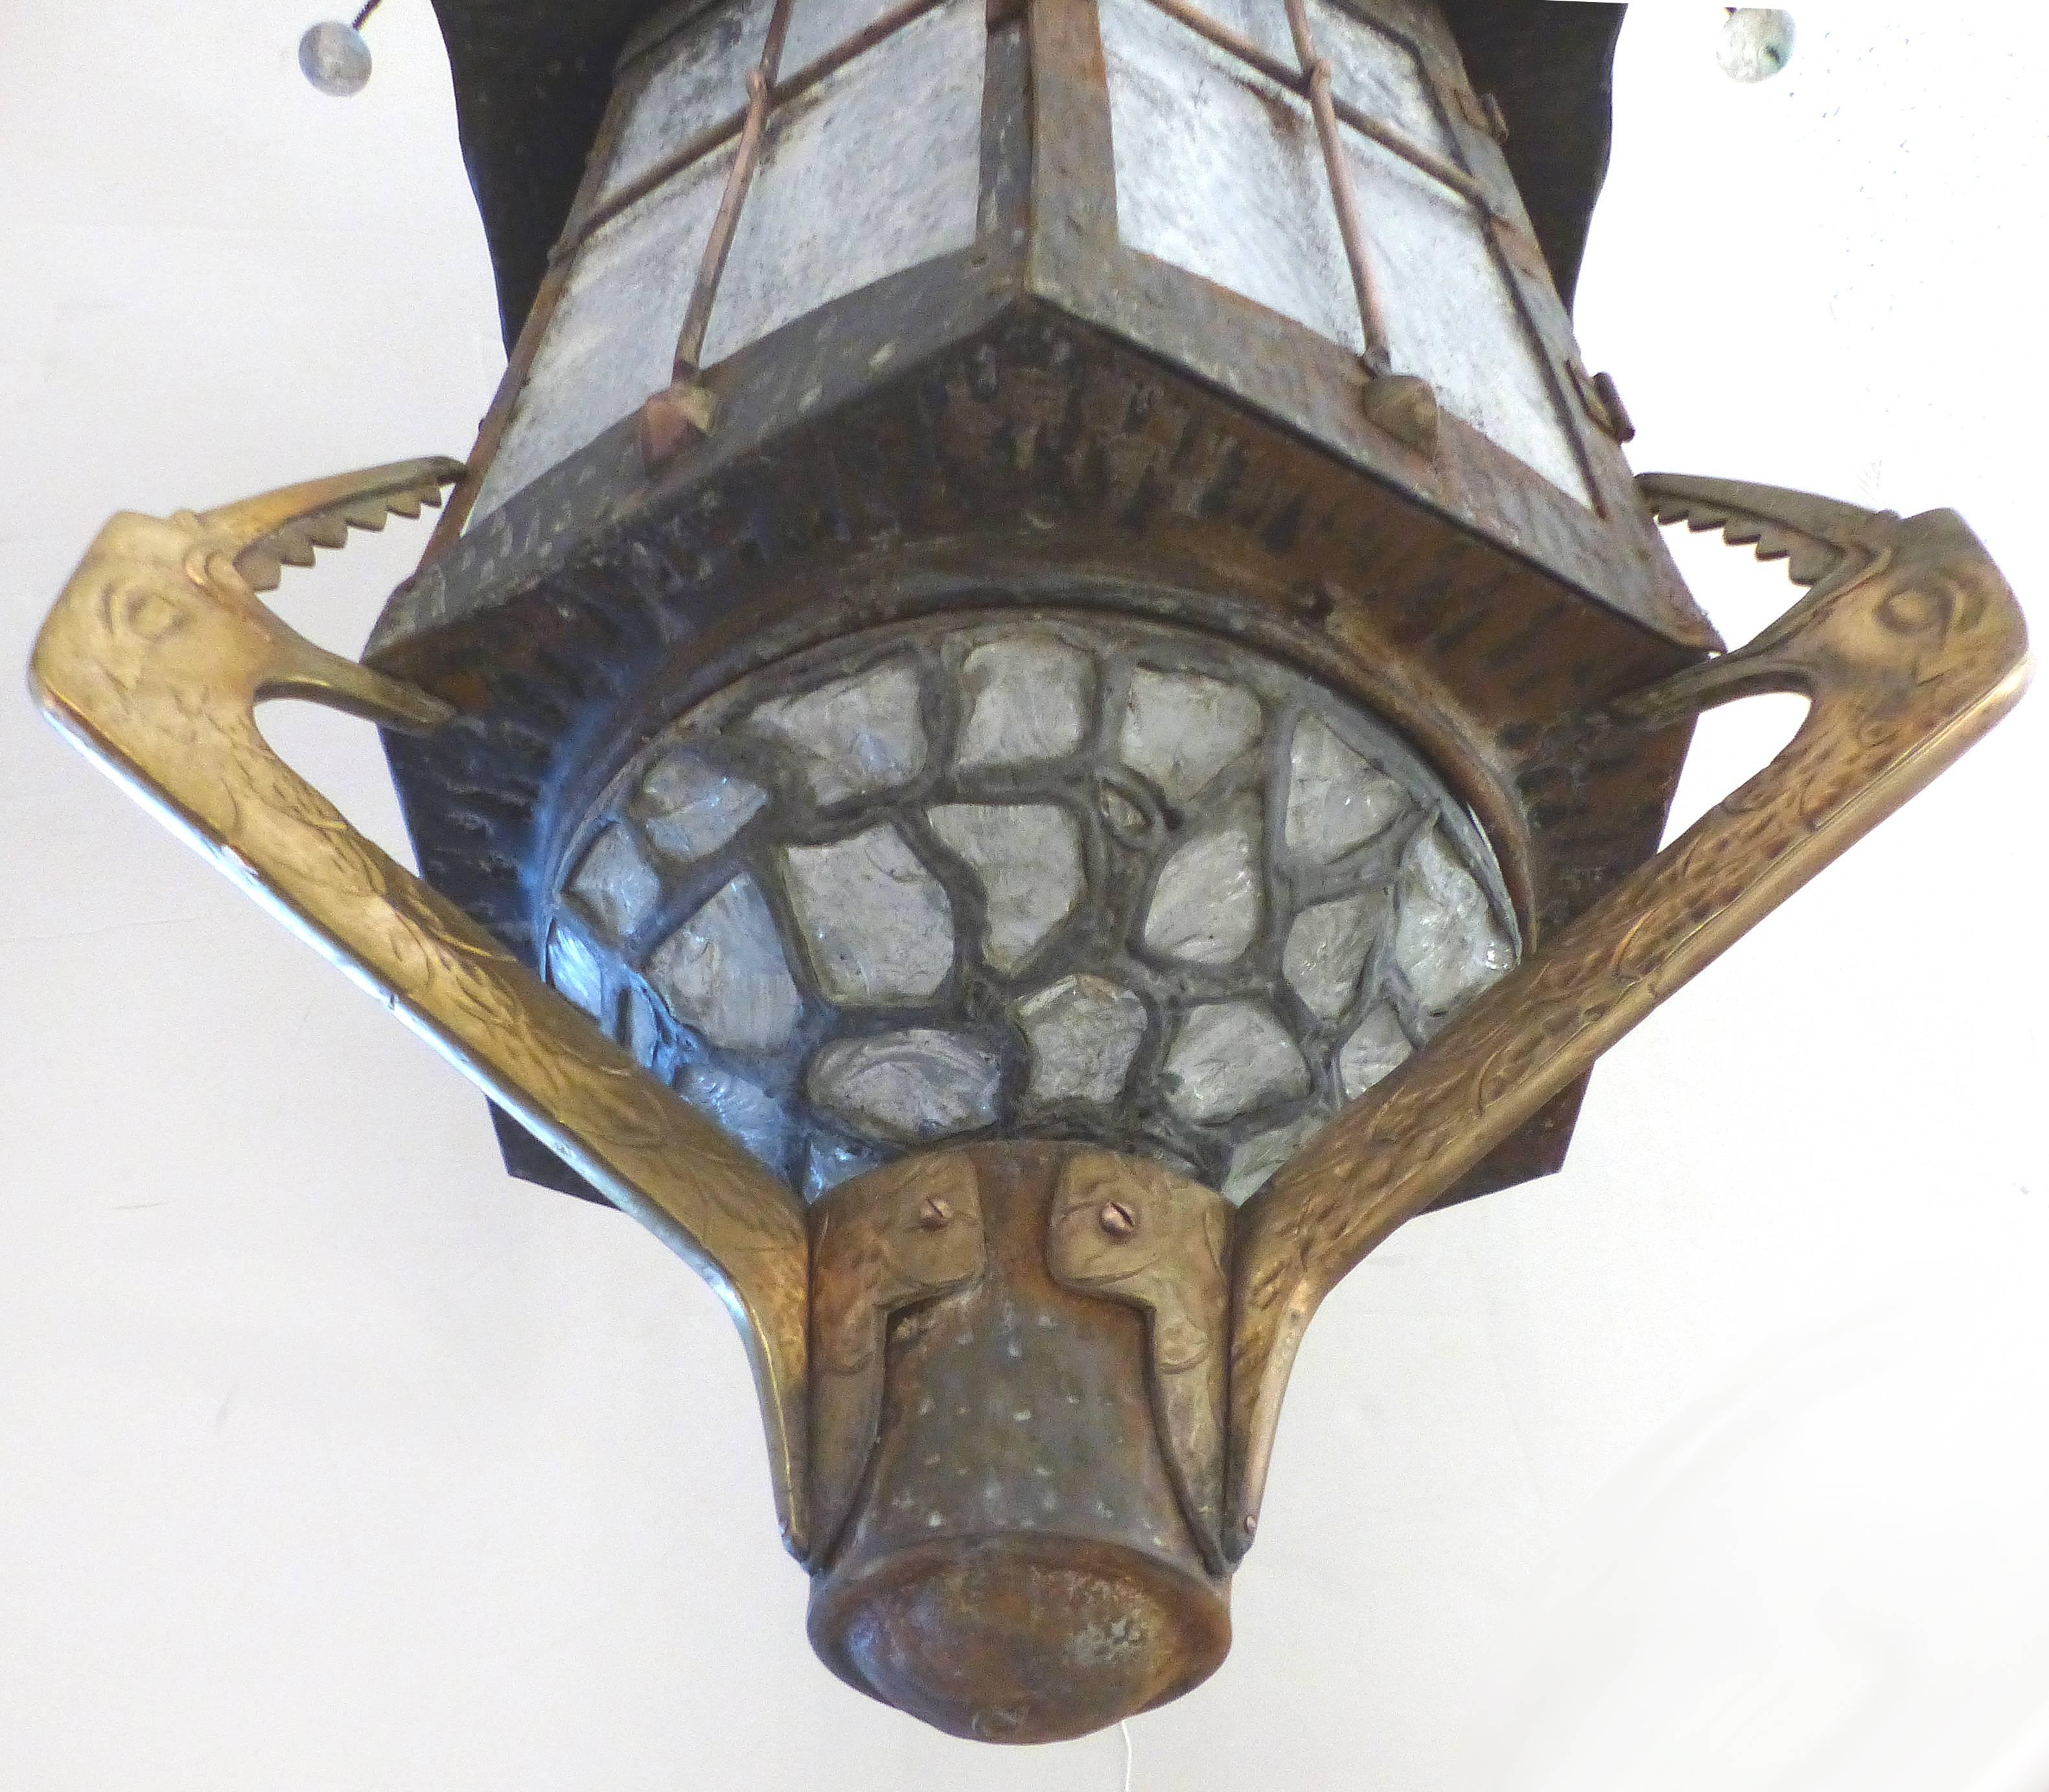 A vintage handmade mixed metals lantern created in an Asian motif. The hexagonal lantern has a hidden door for access and is glazed in frosted rippled glass. Each panel is guarded by crossed copper bars. The lantern top is vented and glass drops are